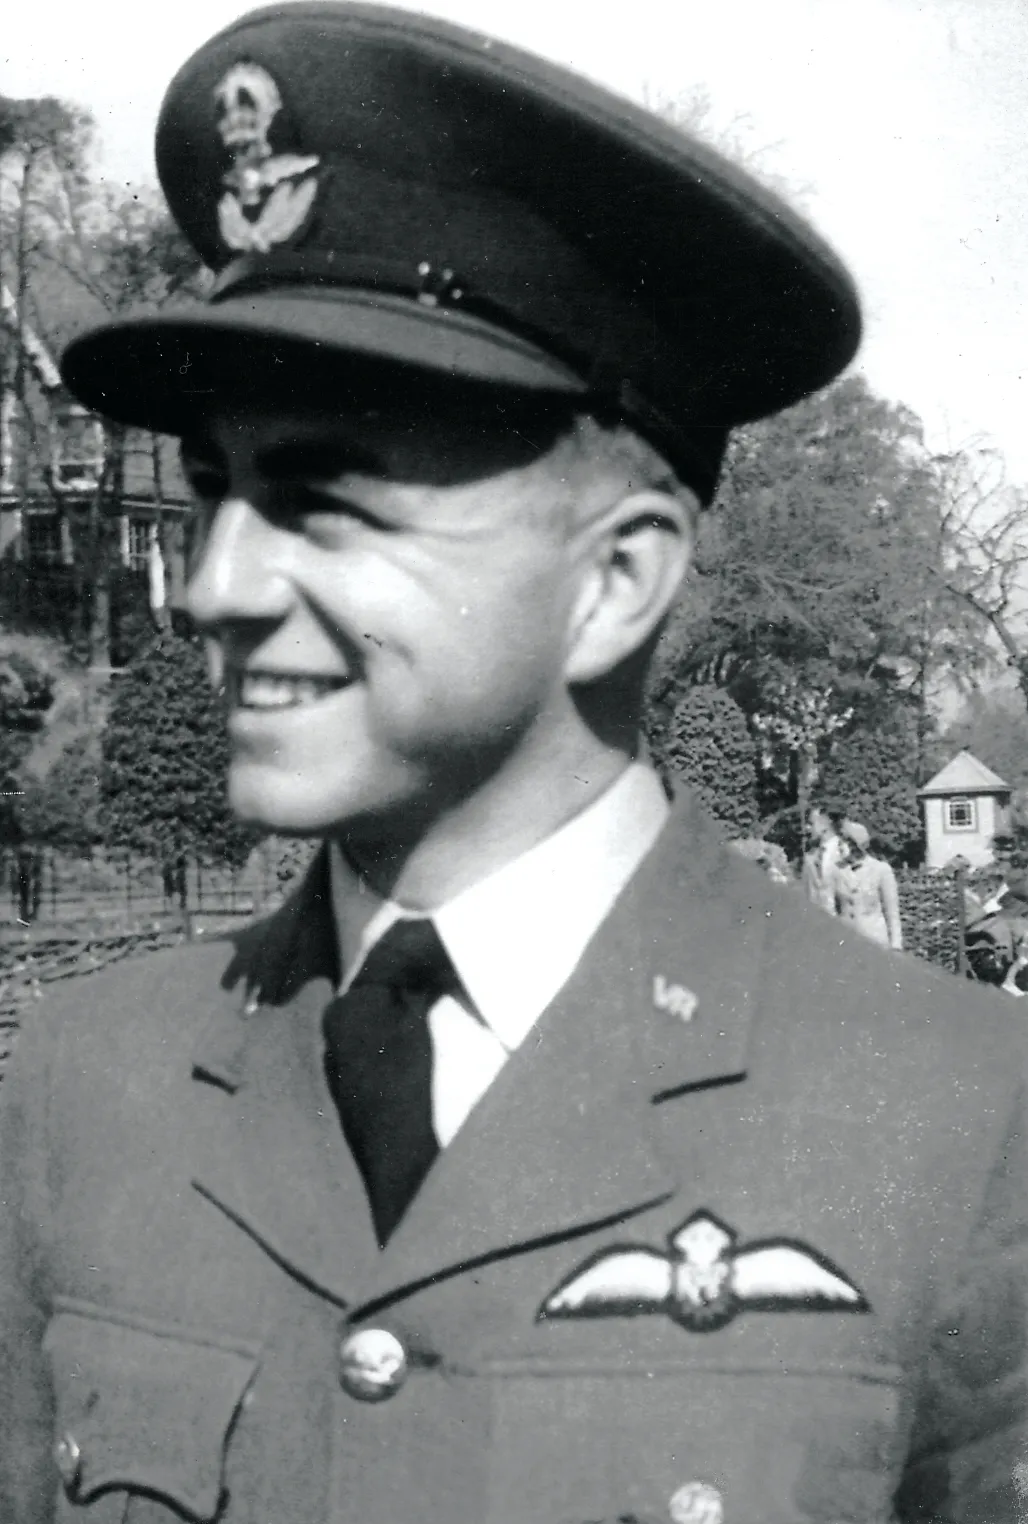 Black and white photograph of a young man in RAF uniform